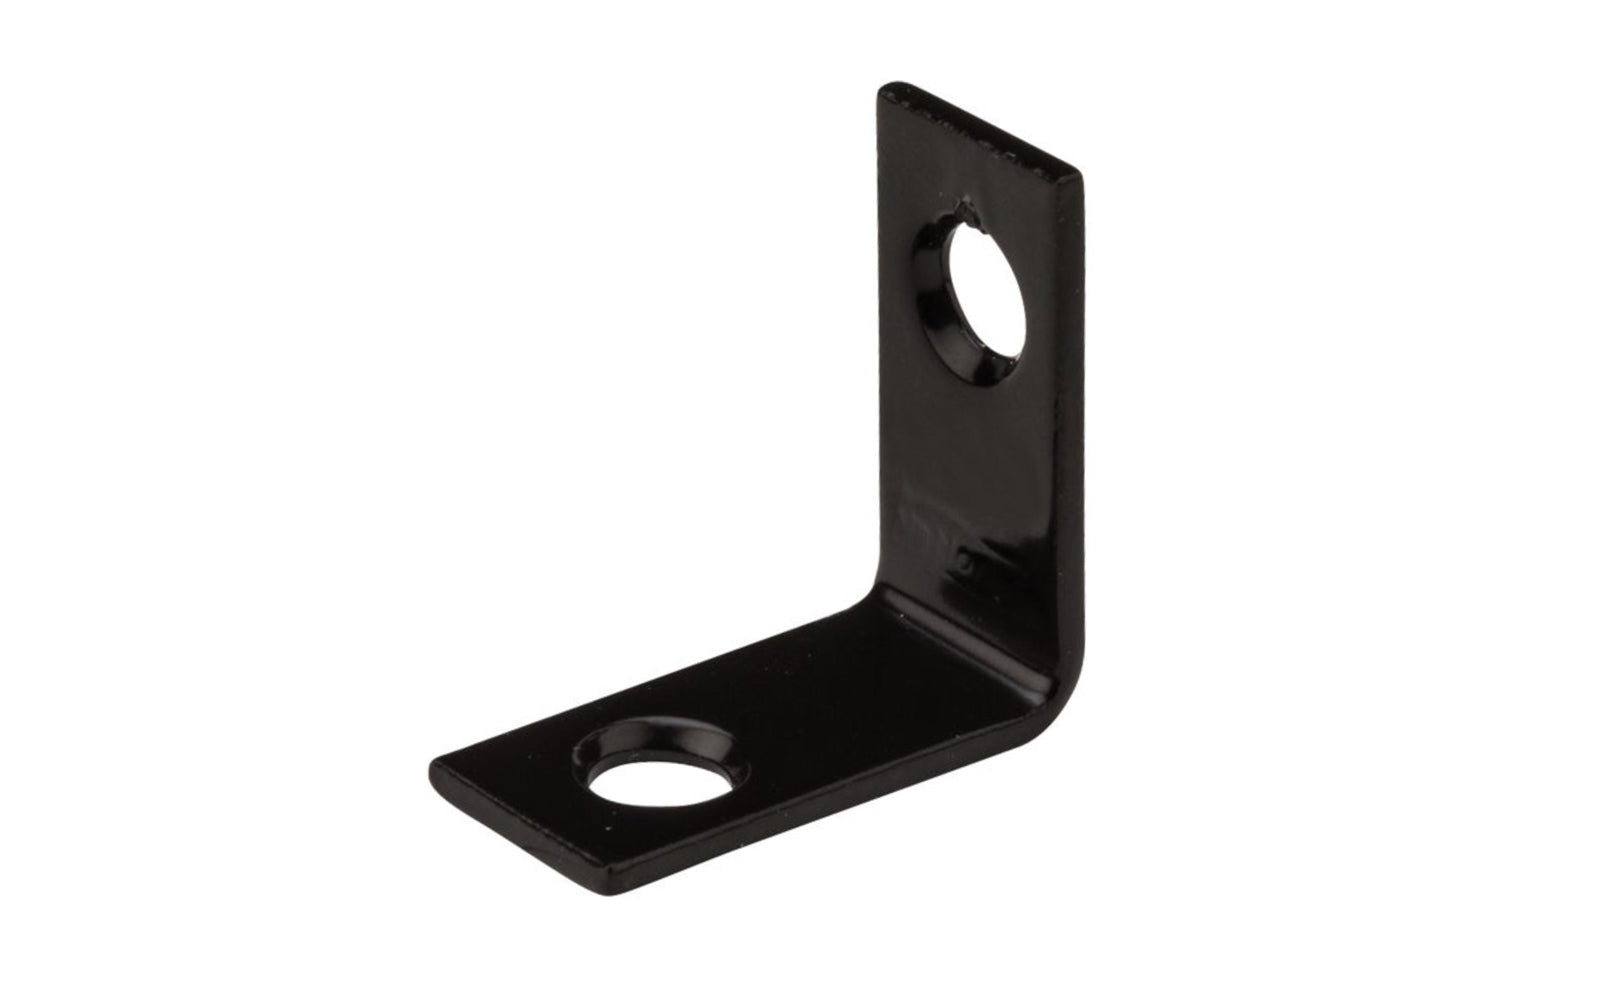 This 1" x 1/2" Black Finish Corner Brace is designed for furniture, countertops, shelving support, chests, cabinets, etc. Great for repair of many items & other home, workshop, & industrial applications. Made of steel material with a black finish. Single corner brace. National Hardware Model No. N226-479. 886780014532